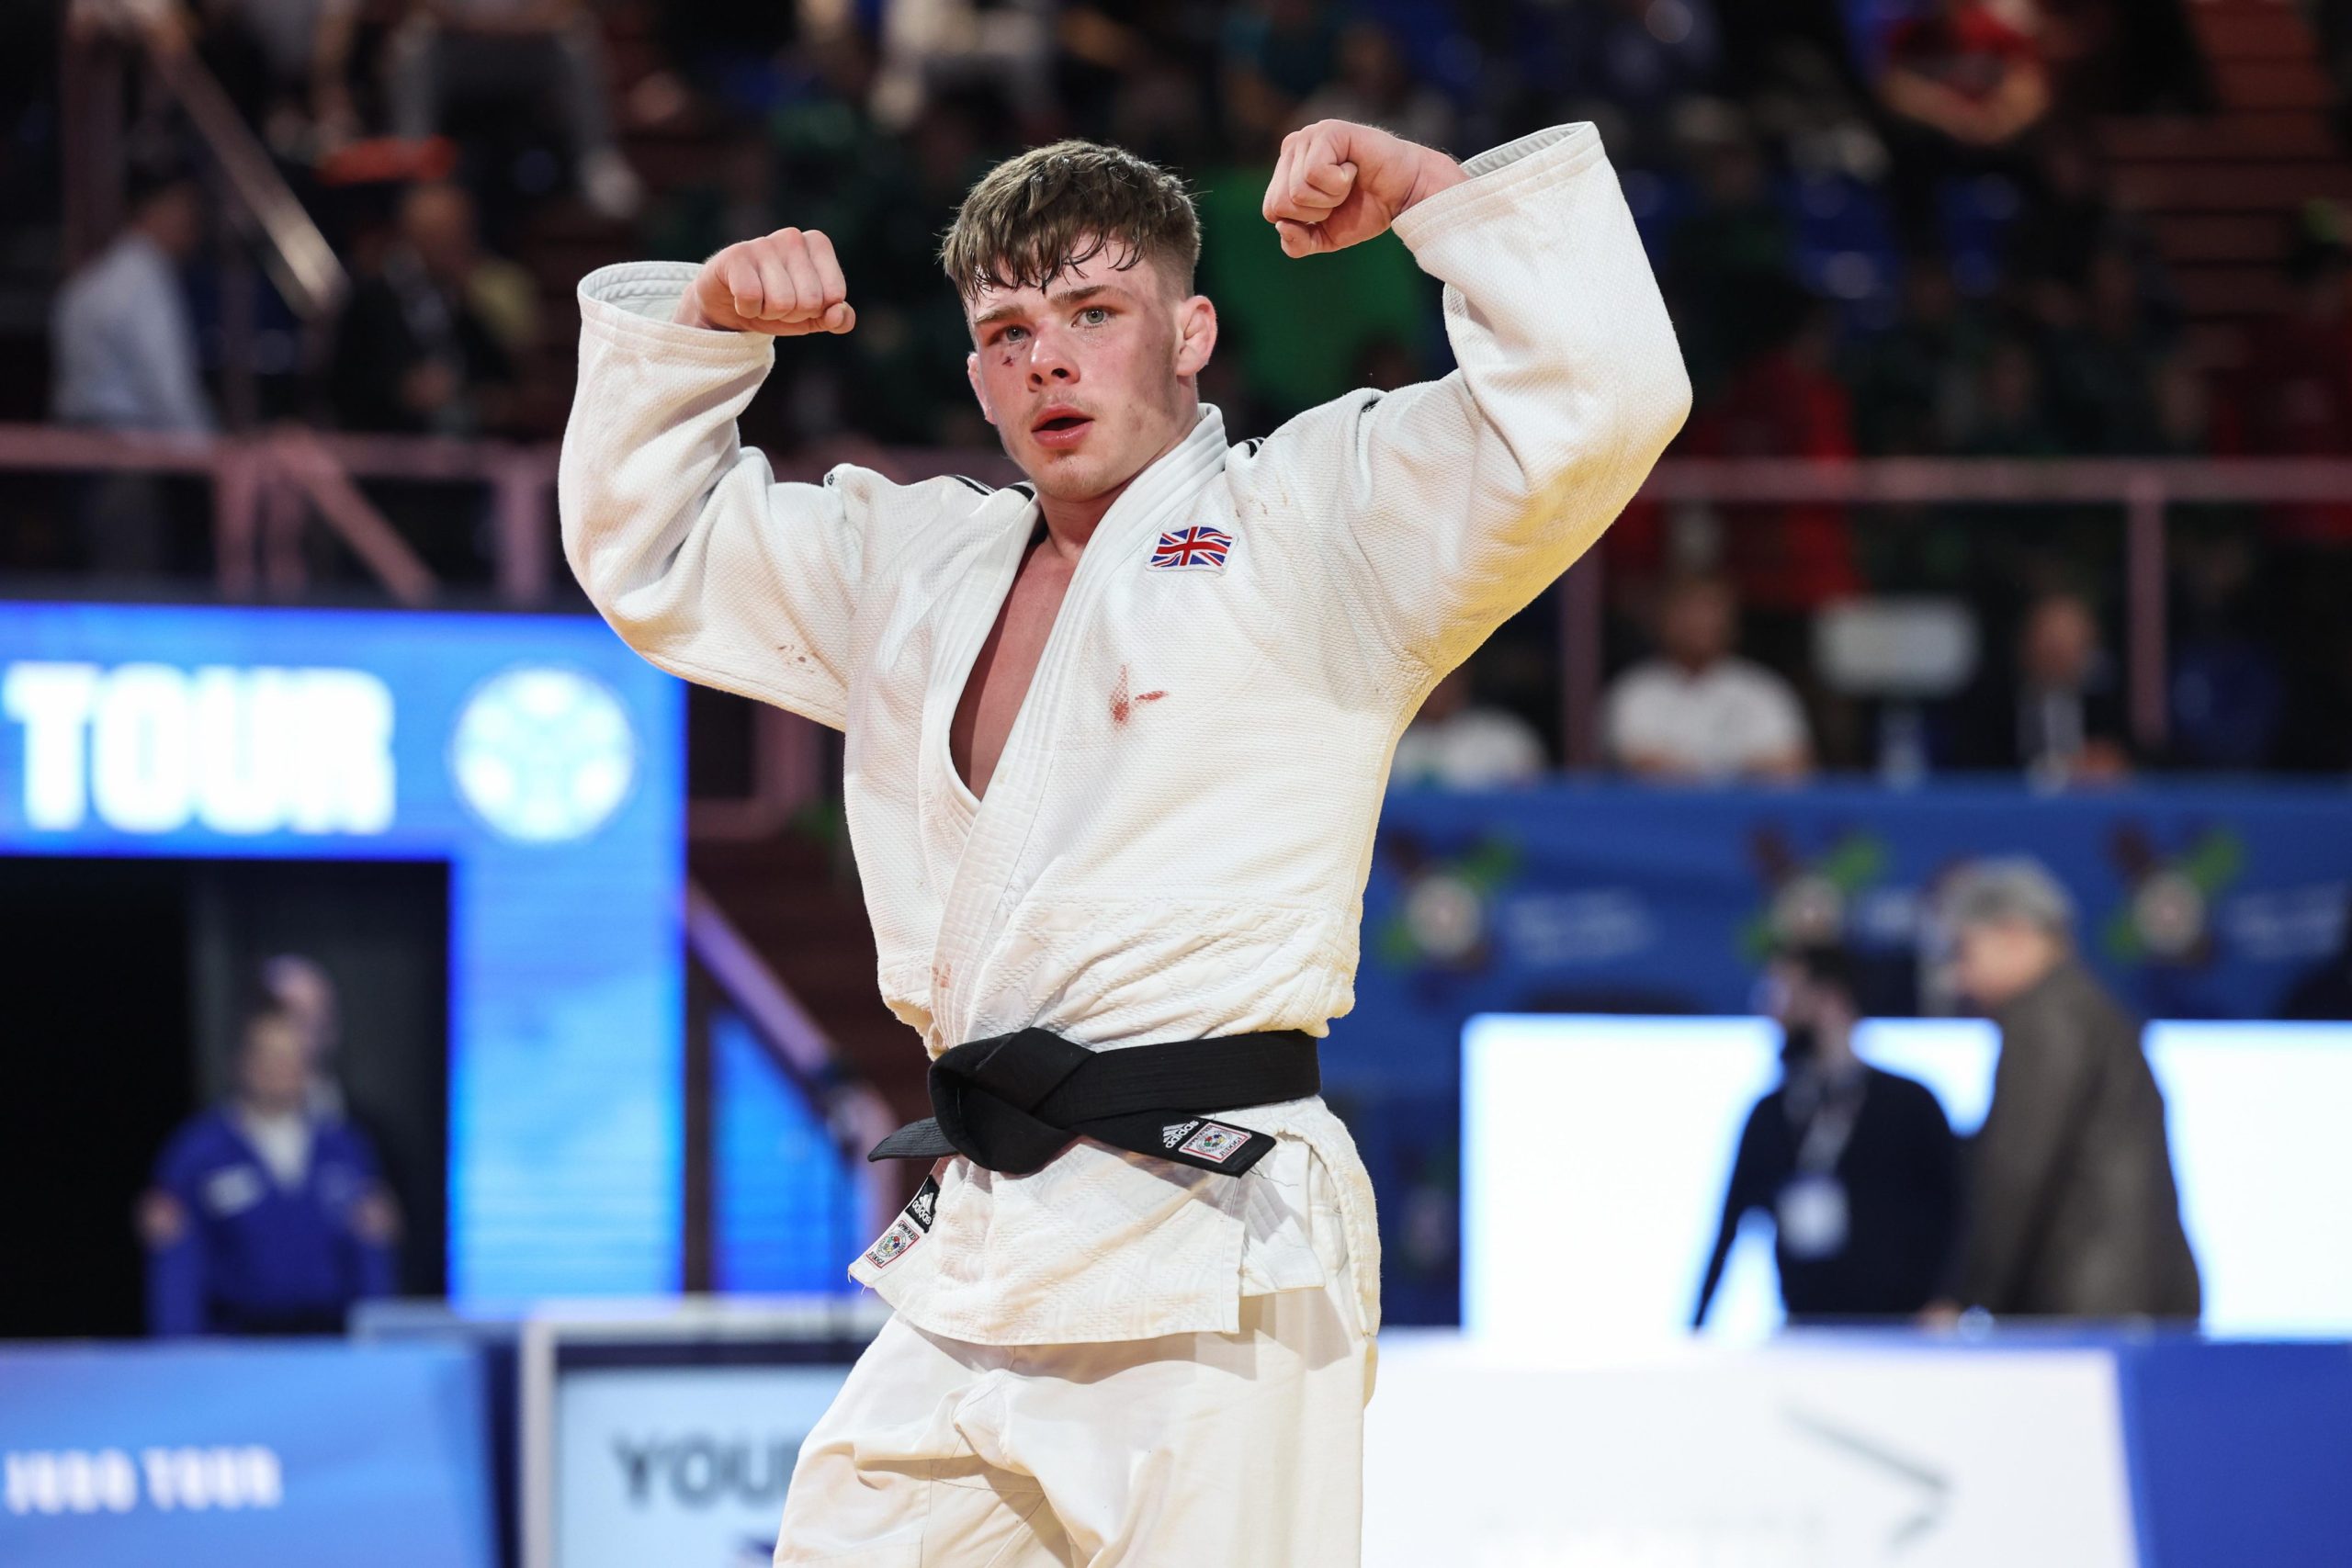 YOUNG SECURES GOLD IN GLADIATOR TERRITORY